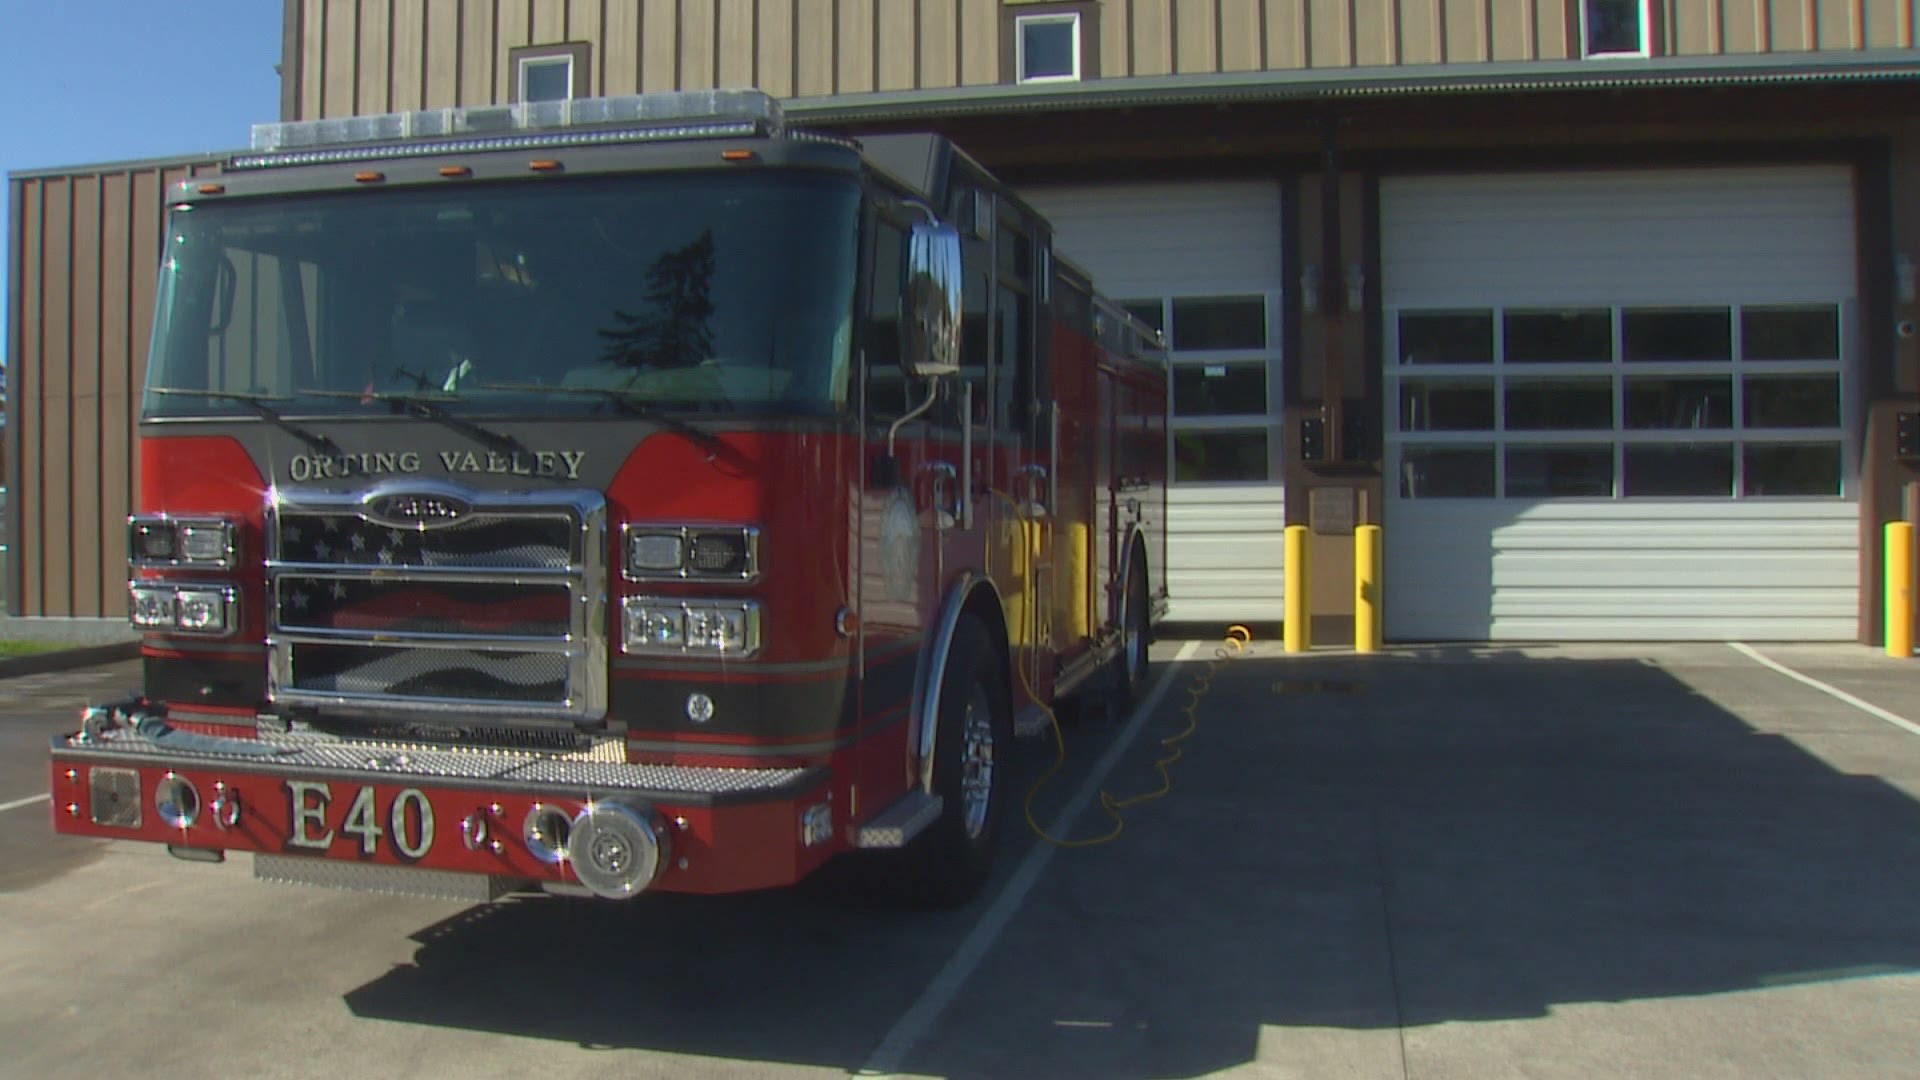 Firefighters in Orting caution that low staff will increase emergency response time if more resources aren't made available.